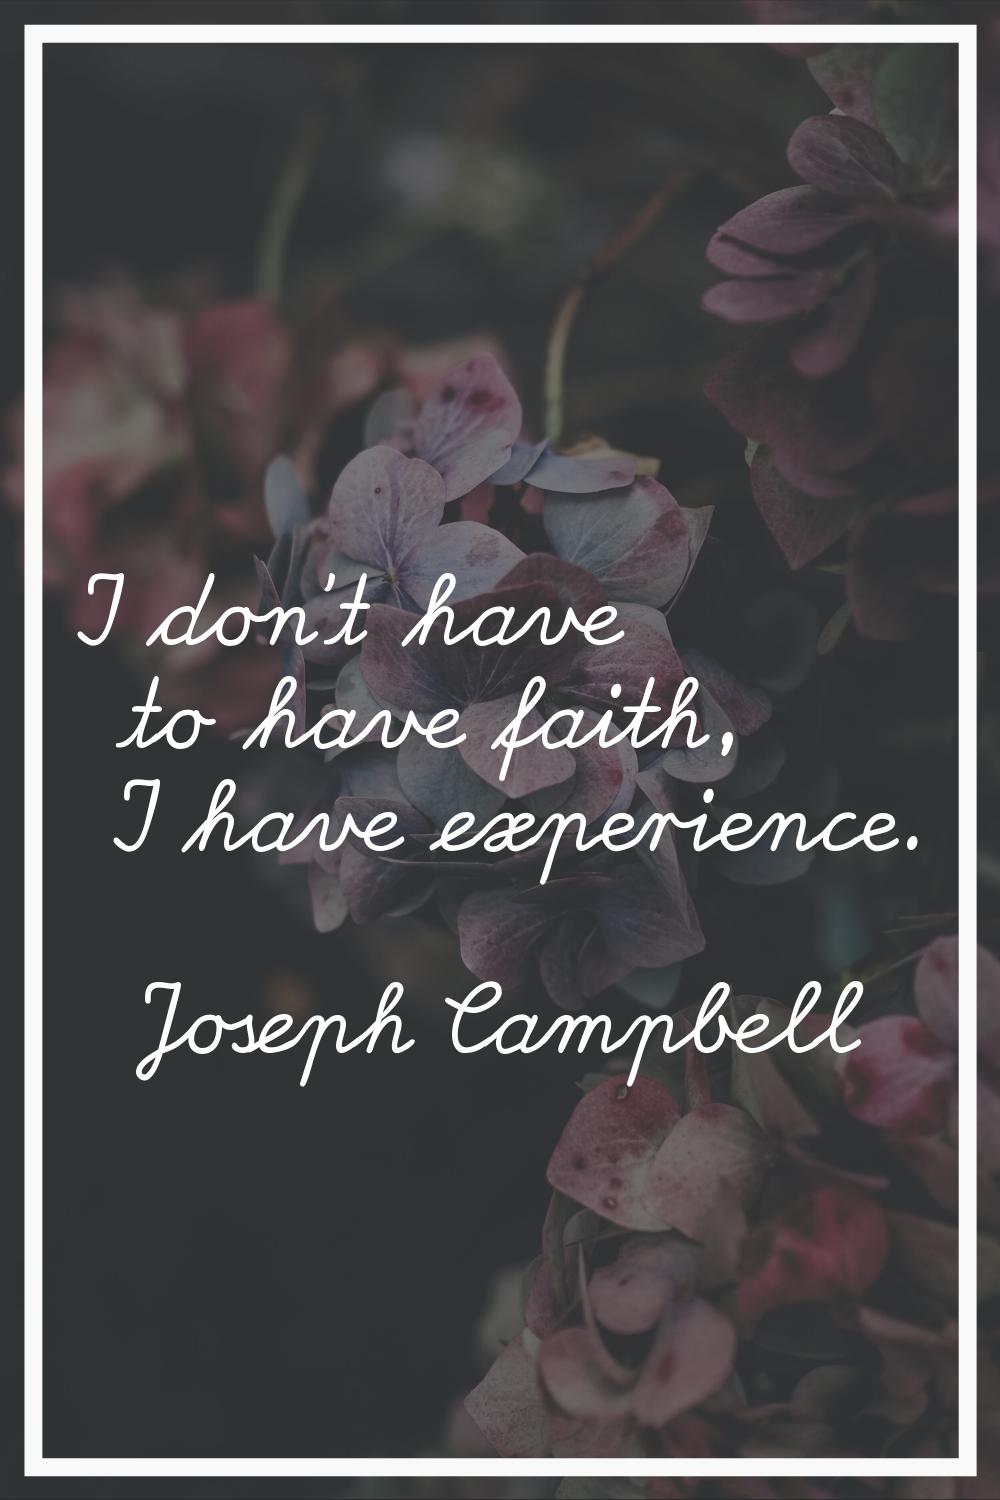 I don't have to have faith, I have experience.